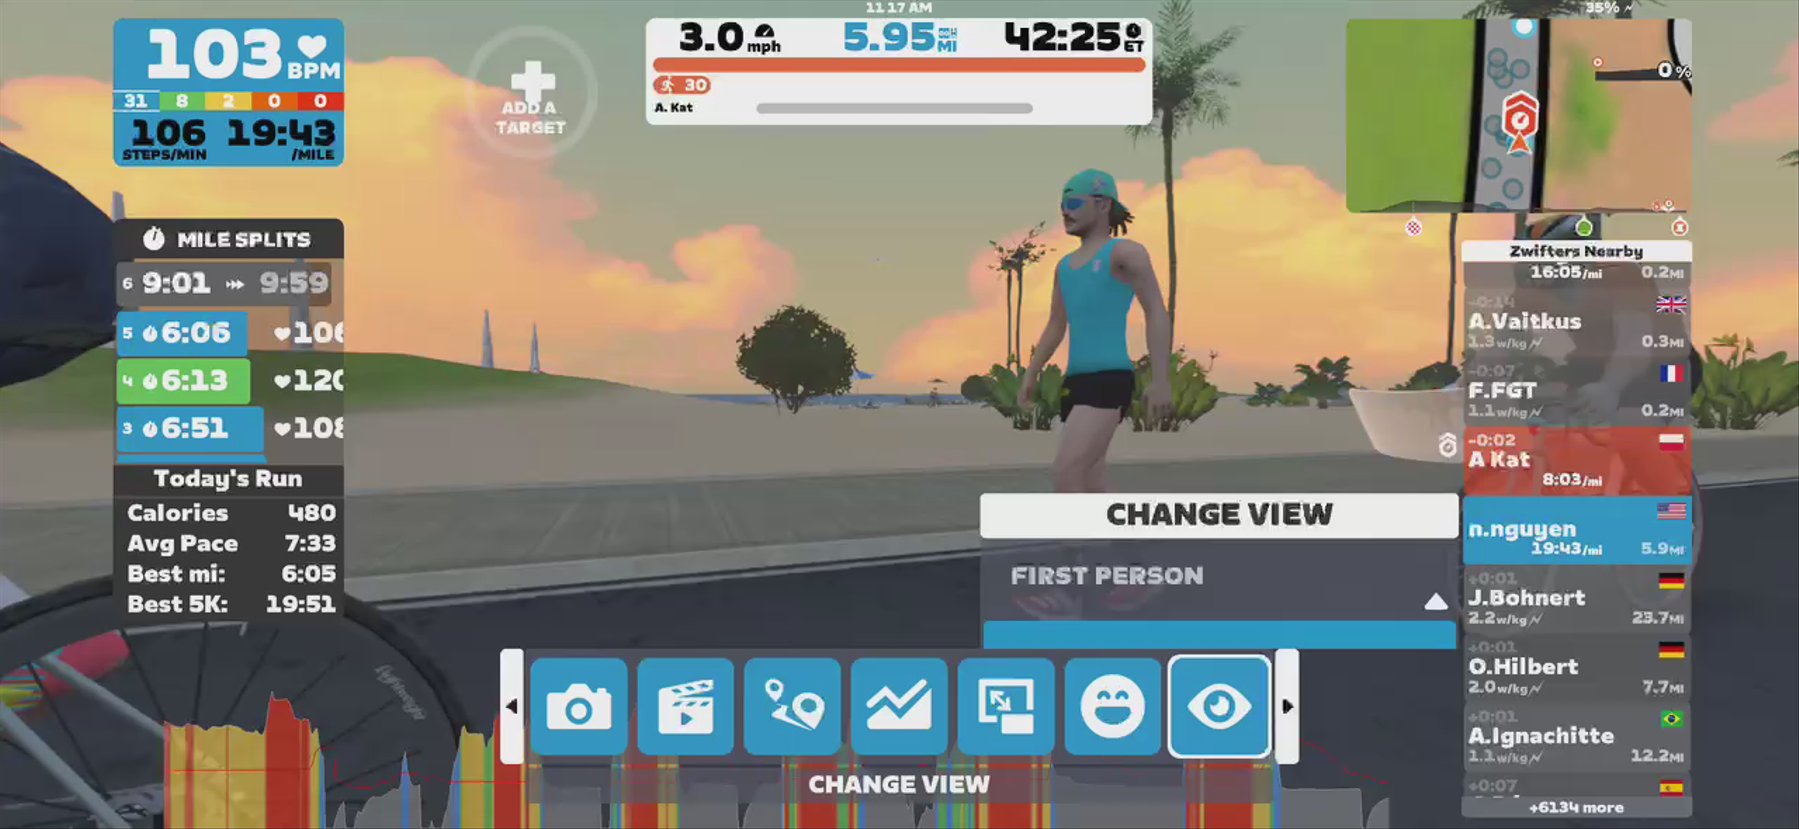 Zwift - Pacer Group Run: Chili Pepper in Watopia with Carl